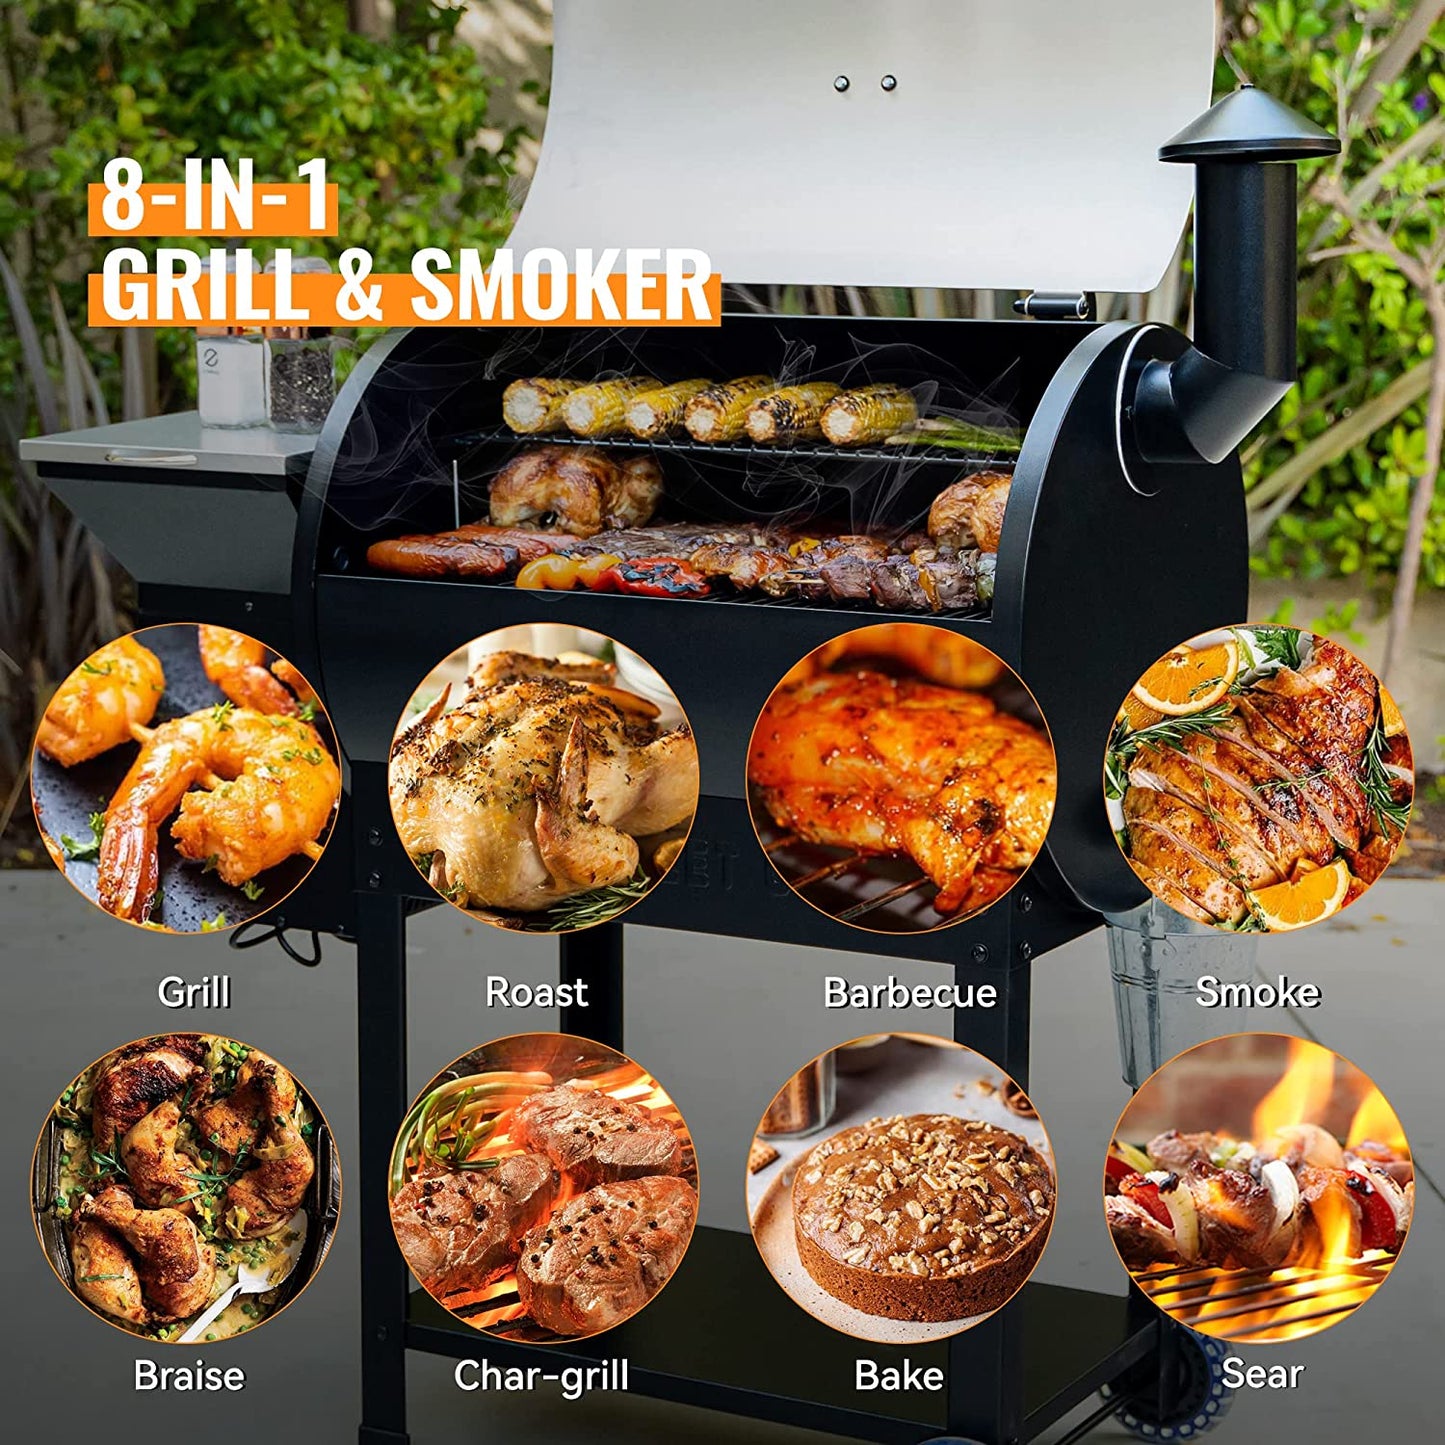 "Ultimate Outdoor Cooking Experience: 8 in 1 Wood Pellet Grill & Smoker with Auto Temperature Control, Massive 697 Sq in Cooking Area - Get the 7002E Now!"